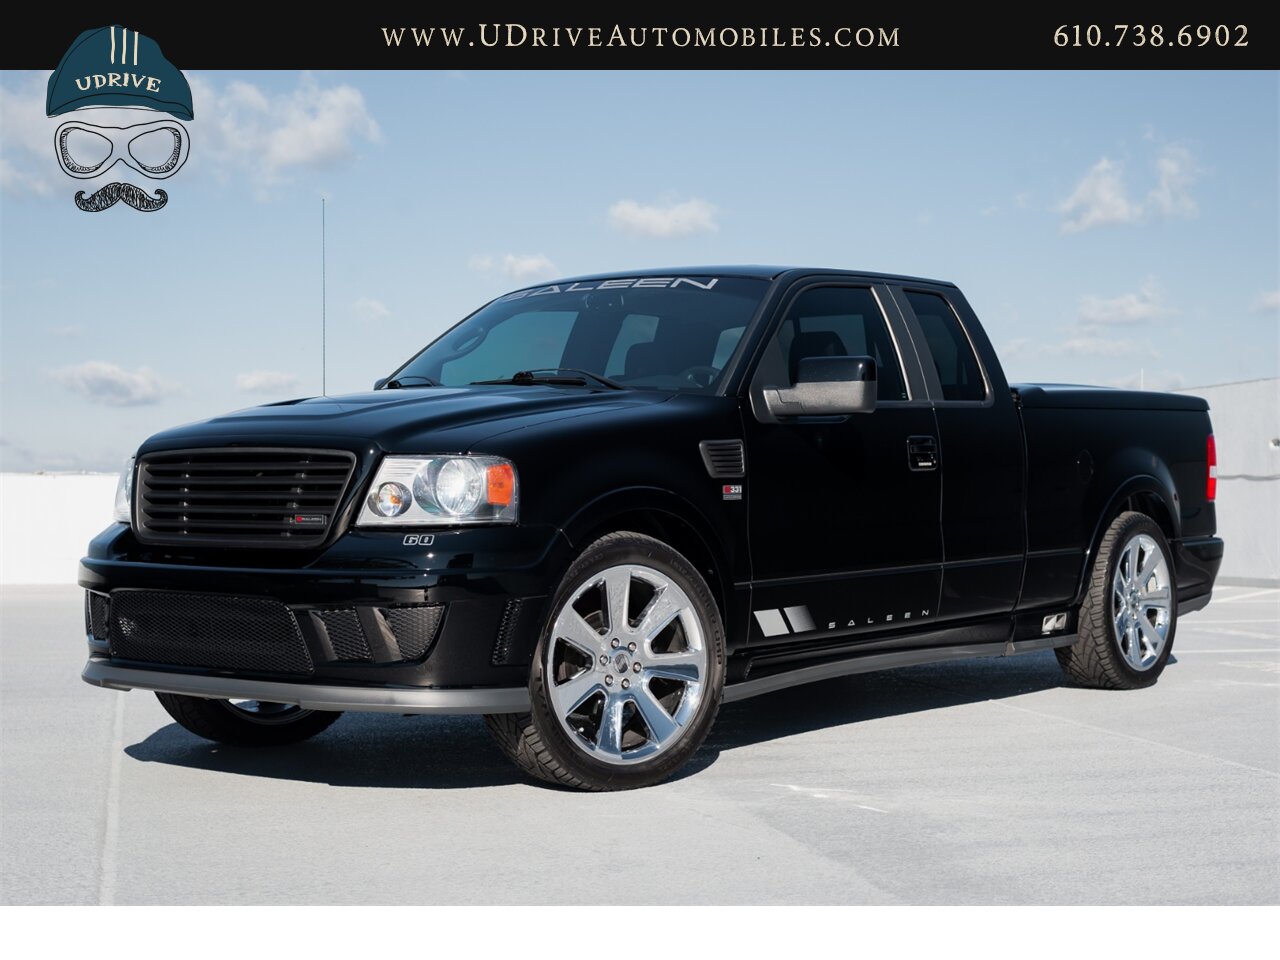 2007 Ford F-150 Saleen S331 Supercharged #60 13k Miles 450HP   - Photo 1 - West Chester, PA 19382